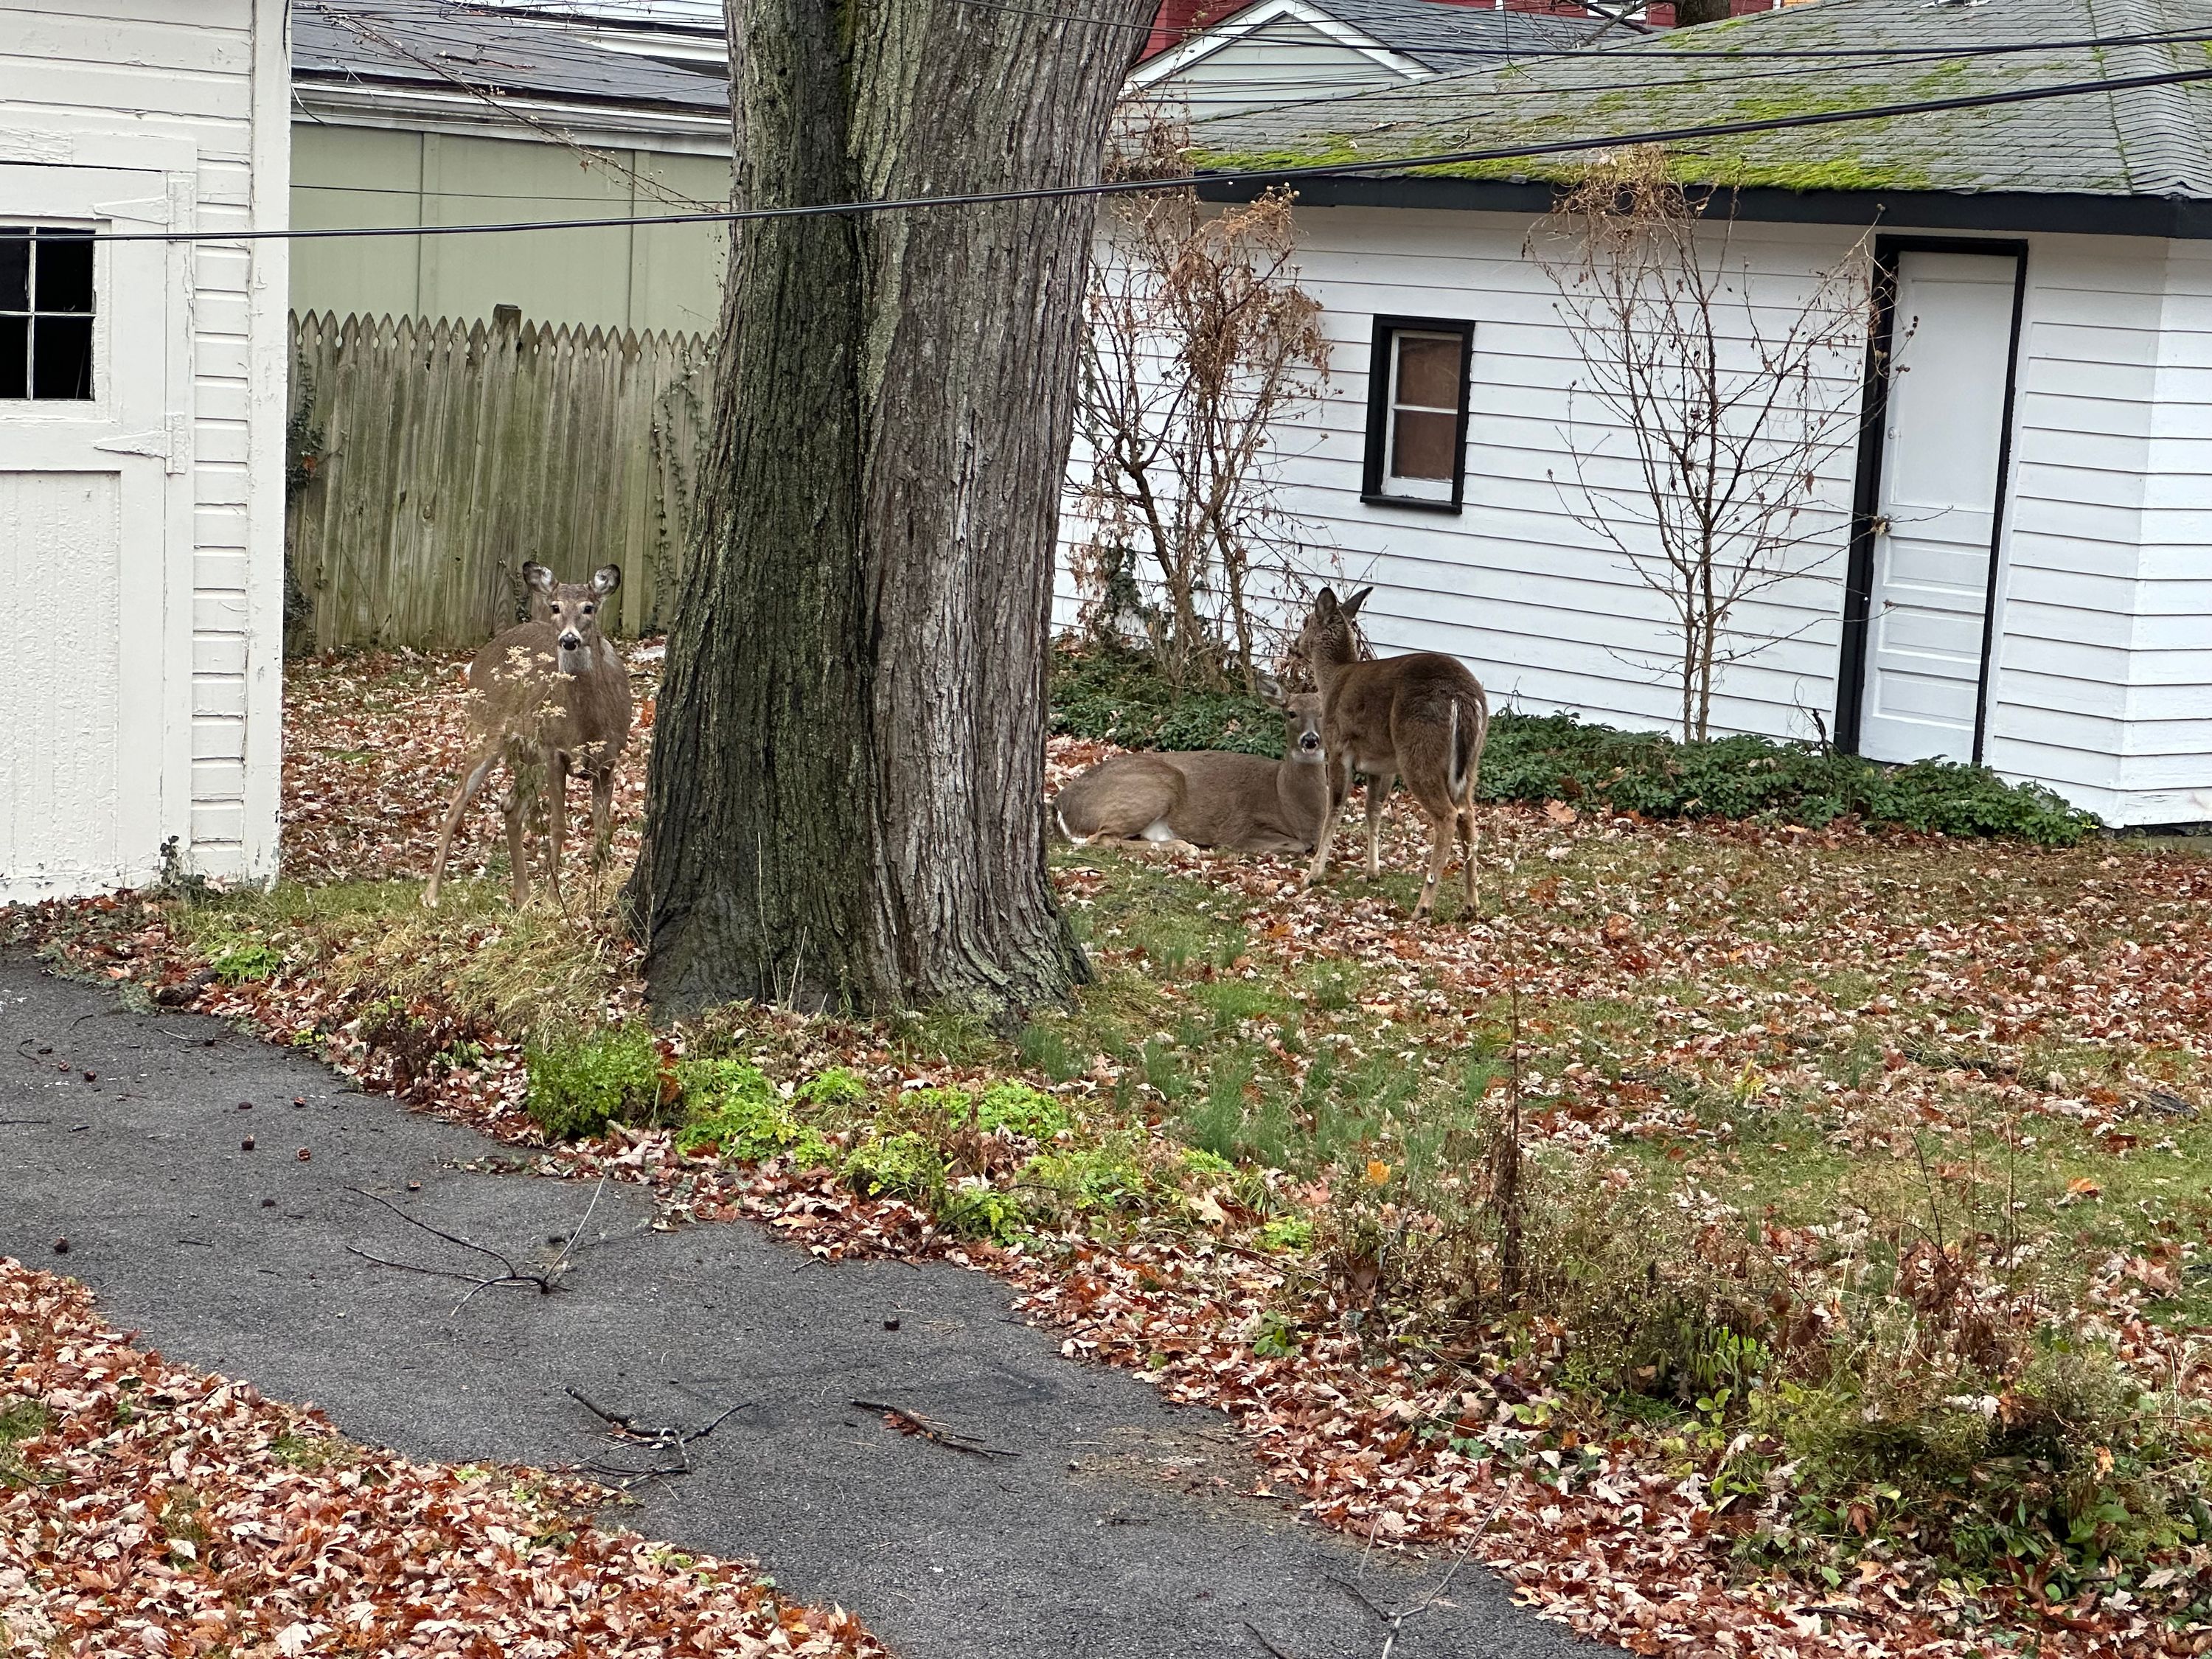 Deer just hanging out in the backyard